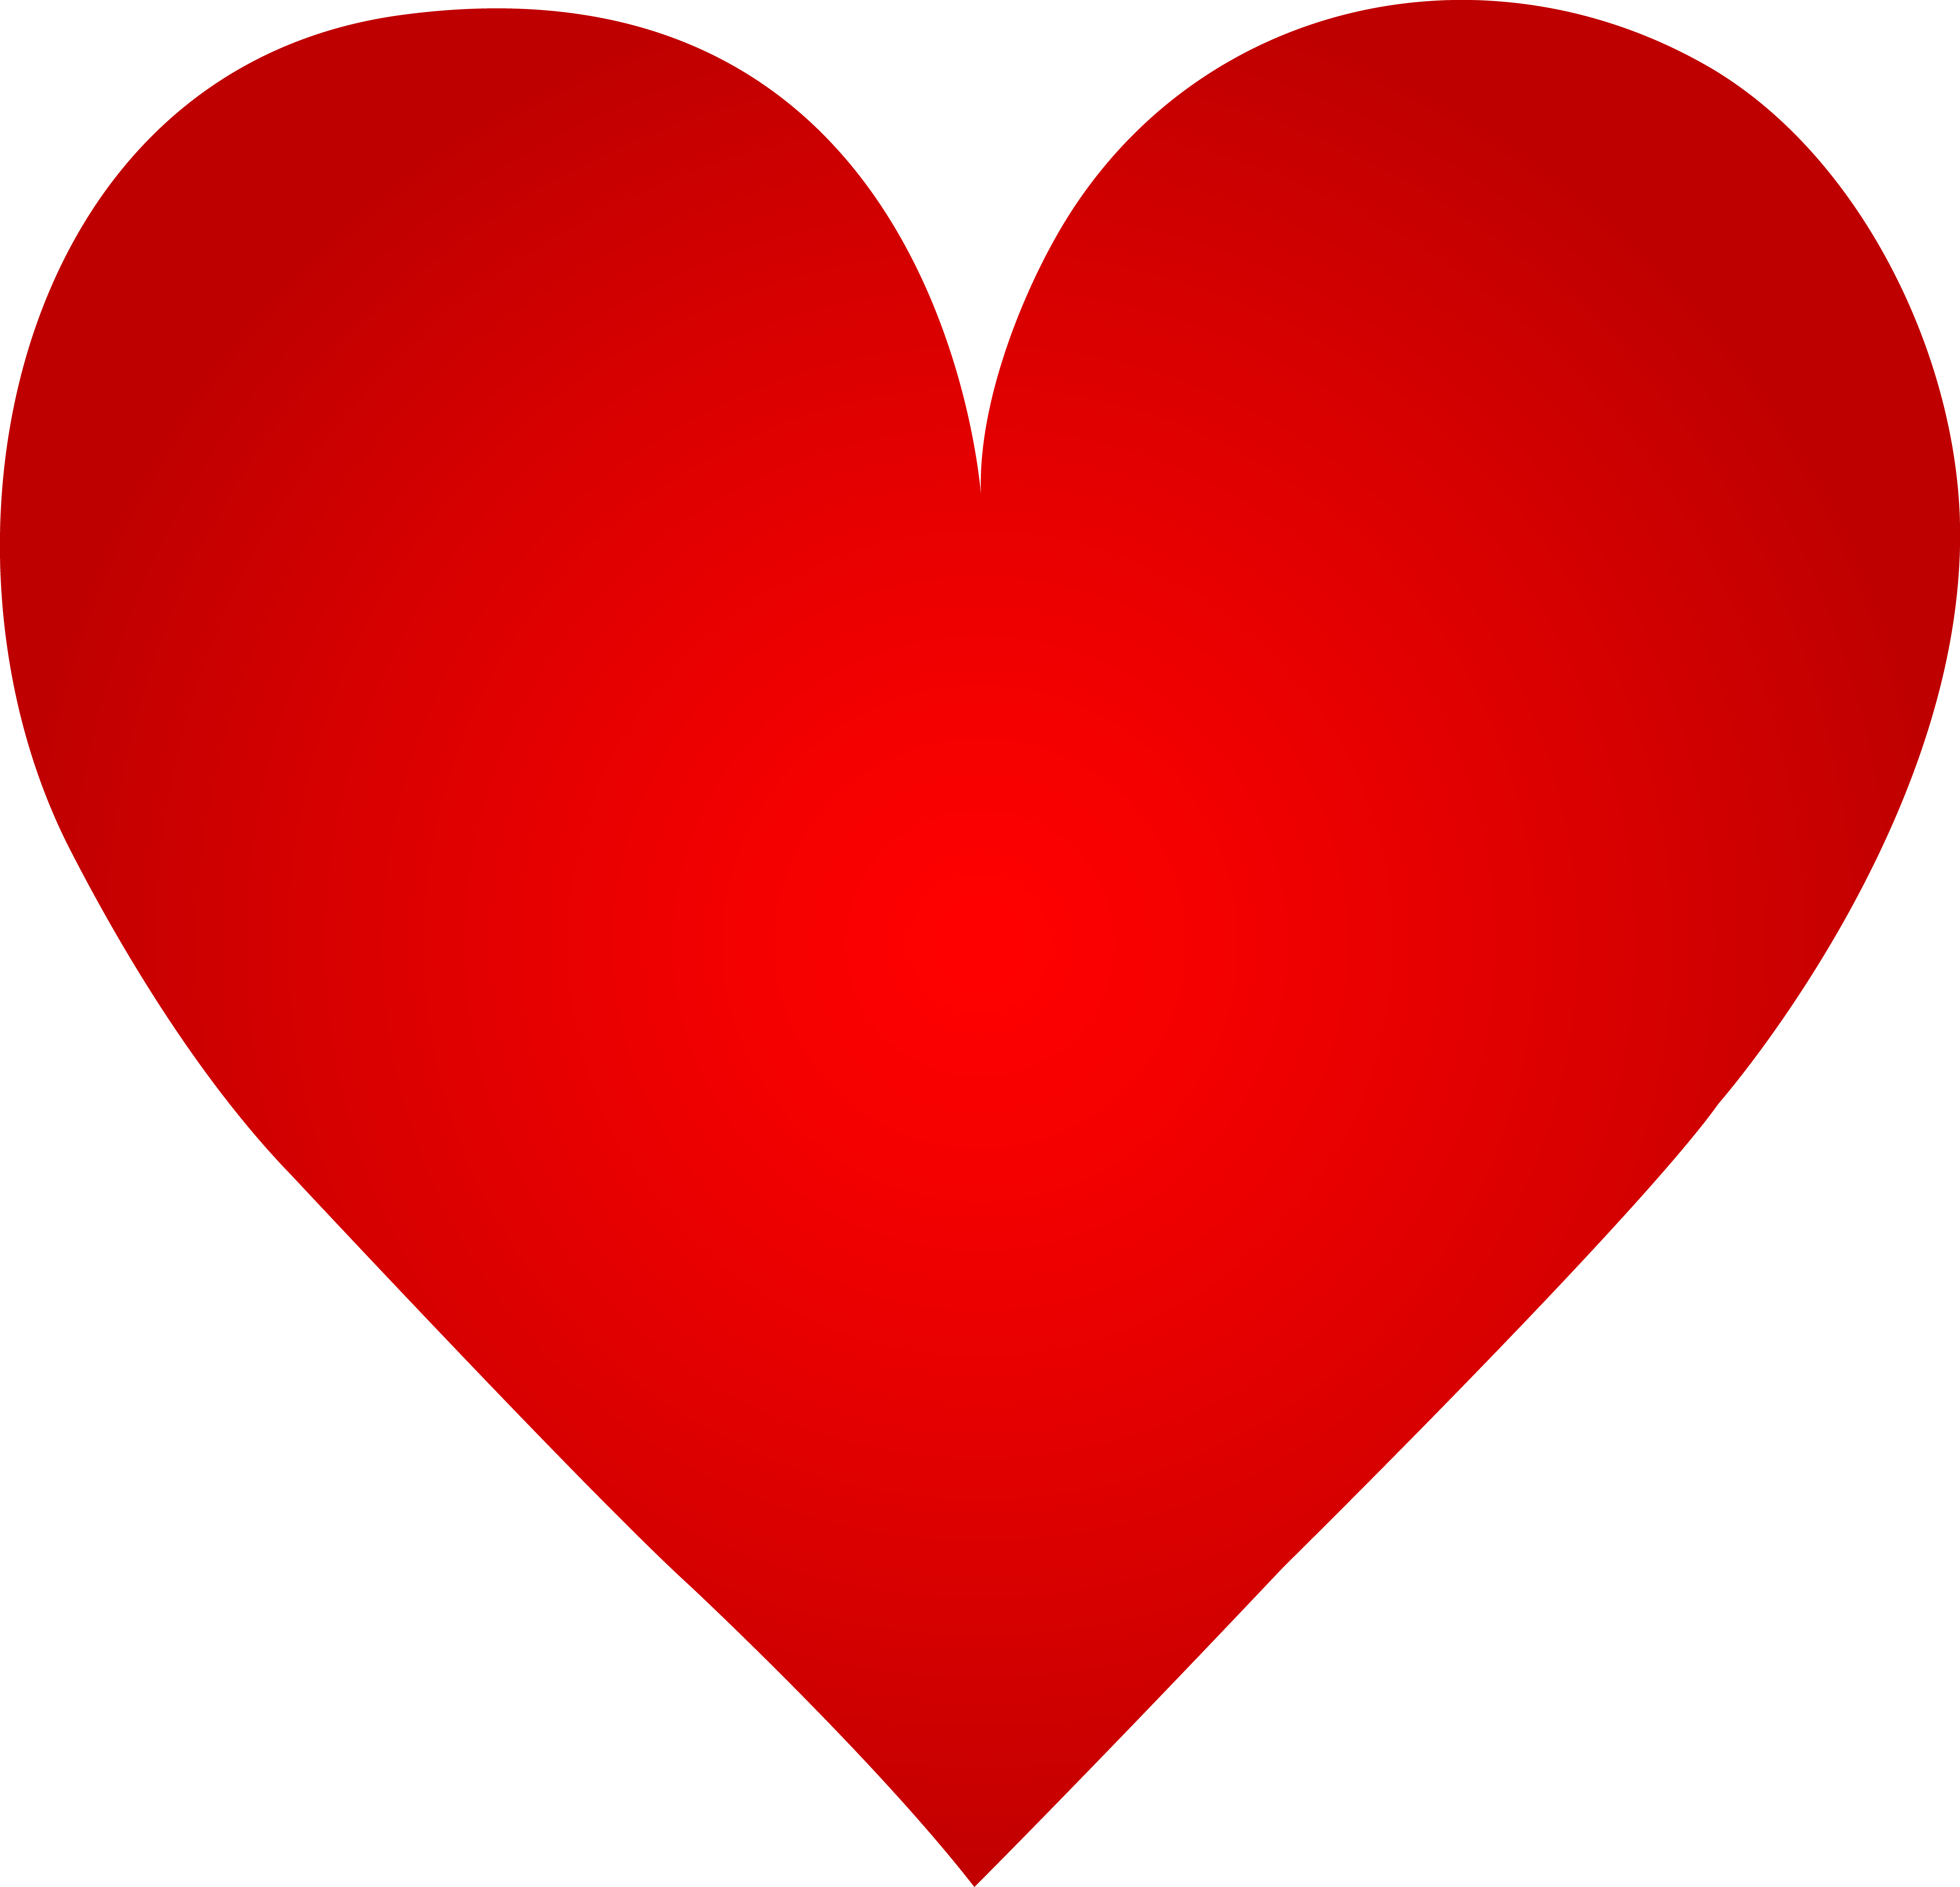 Heart Cartoon Images | Free Download Clip Art | Free Clip Art | on ...